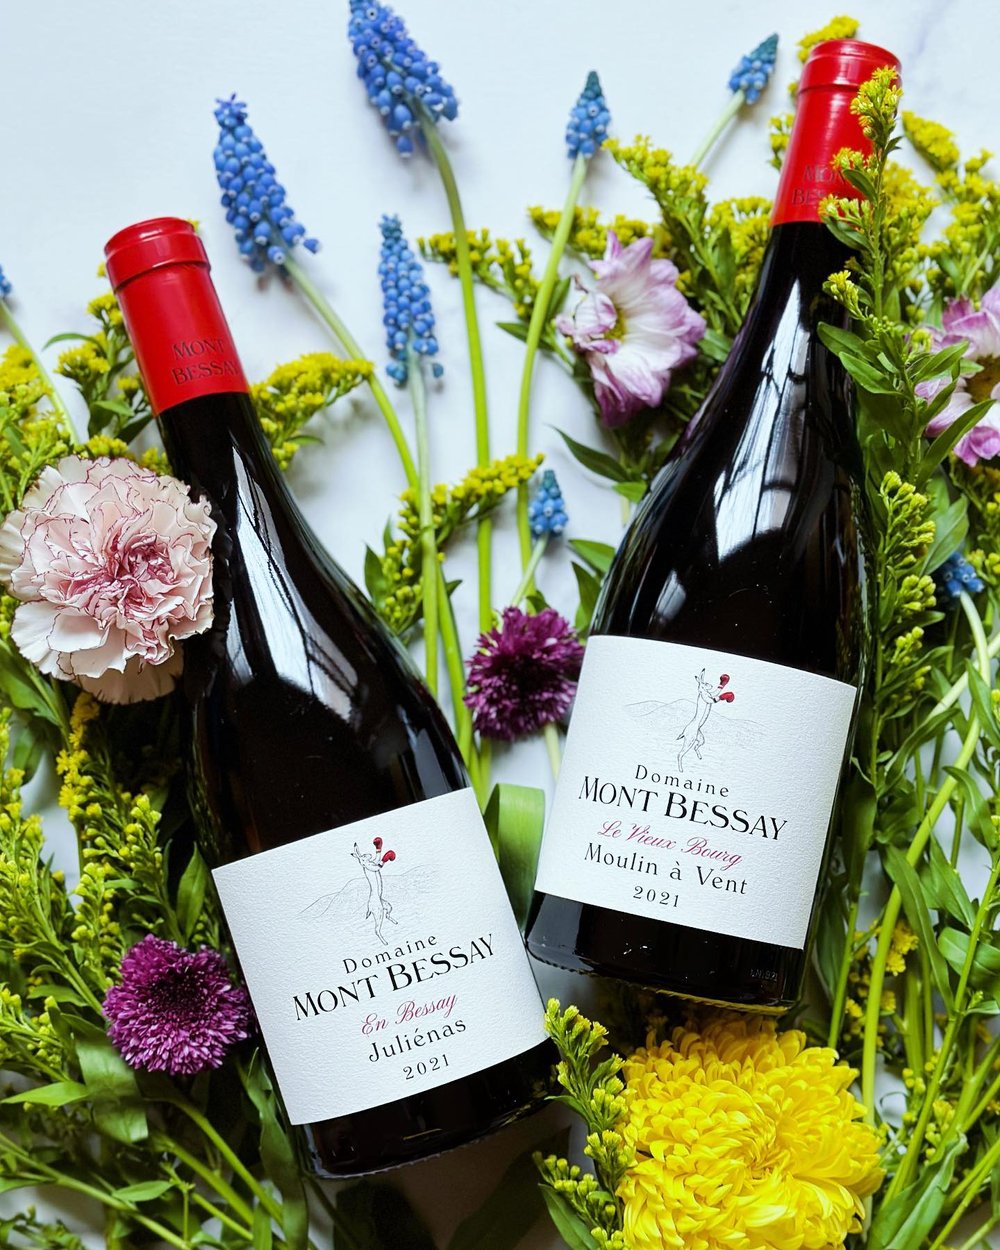 🌸🍷 Blossoms and Beaujolais &ndash; Discover the Charms of Gamay 🍷🌸
​
Happy Friday, my Instagram fam!
How are you enjoying Spring so far? As the days get longer, summer is right around the corner. Now is the perfect time to enjoy some delicious Be